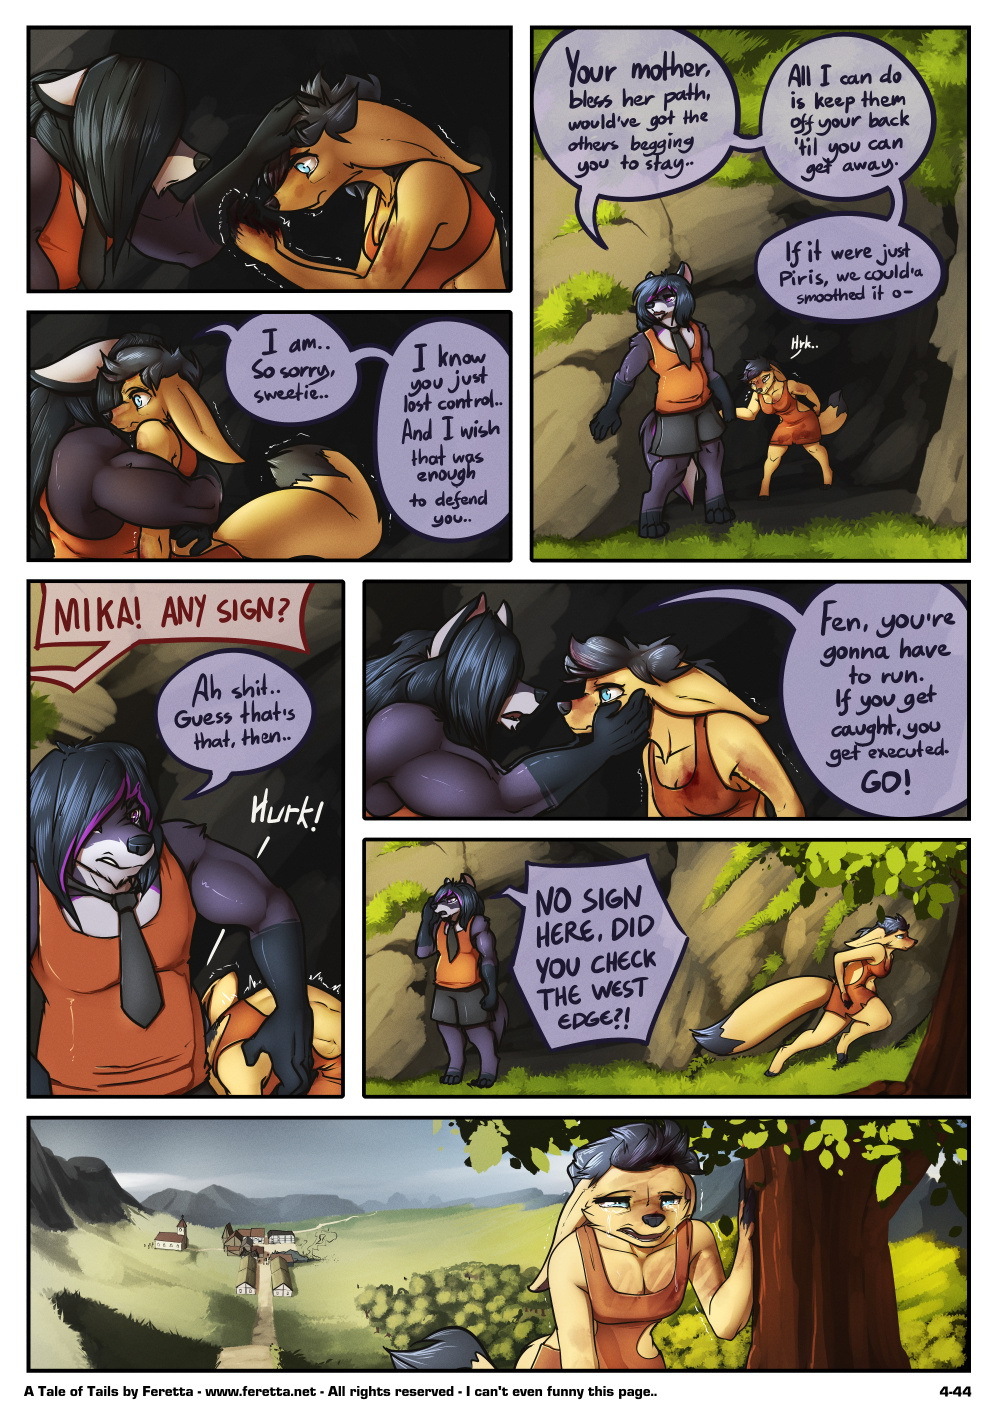 A Tale of Tails 4 - Matters of the mind - Page 44